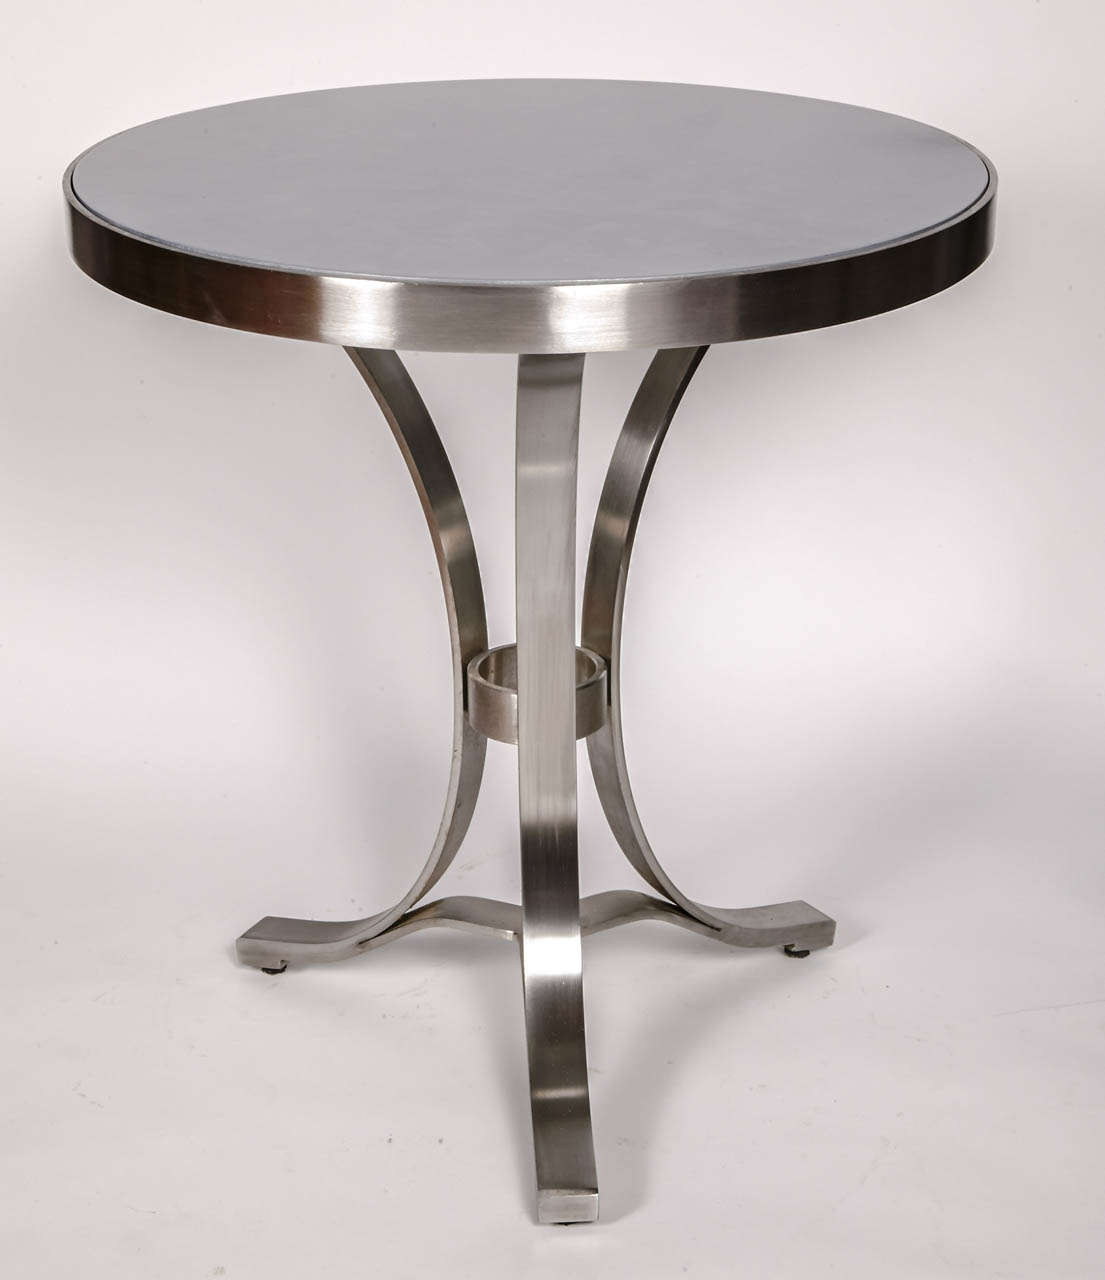 Pair of steel and lacquered wood top side tables.